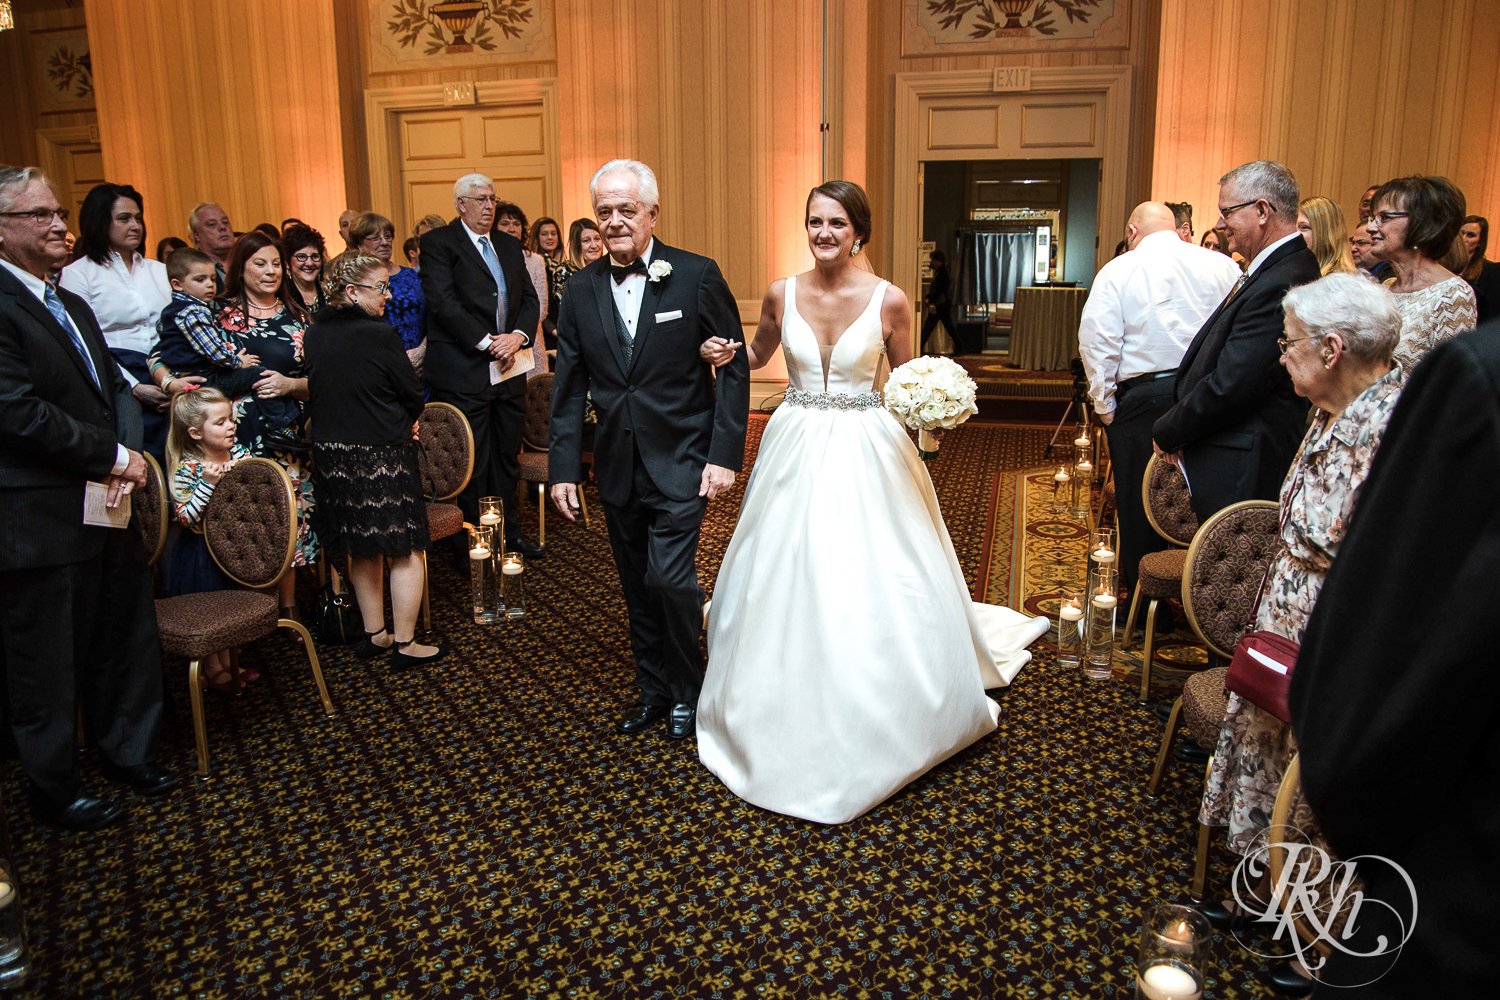 Bride walks down the aisle with dad during wedding ceremony at The Saint Paul Hotel in Saint Paul, Minnesota.